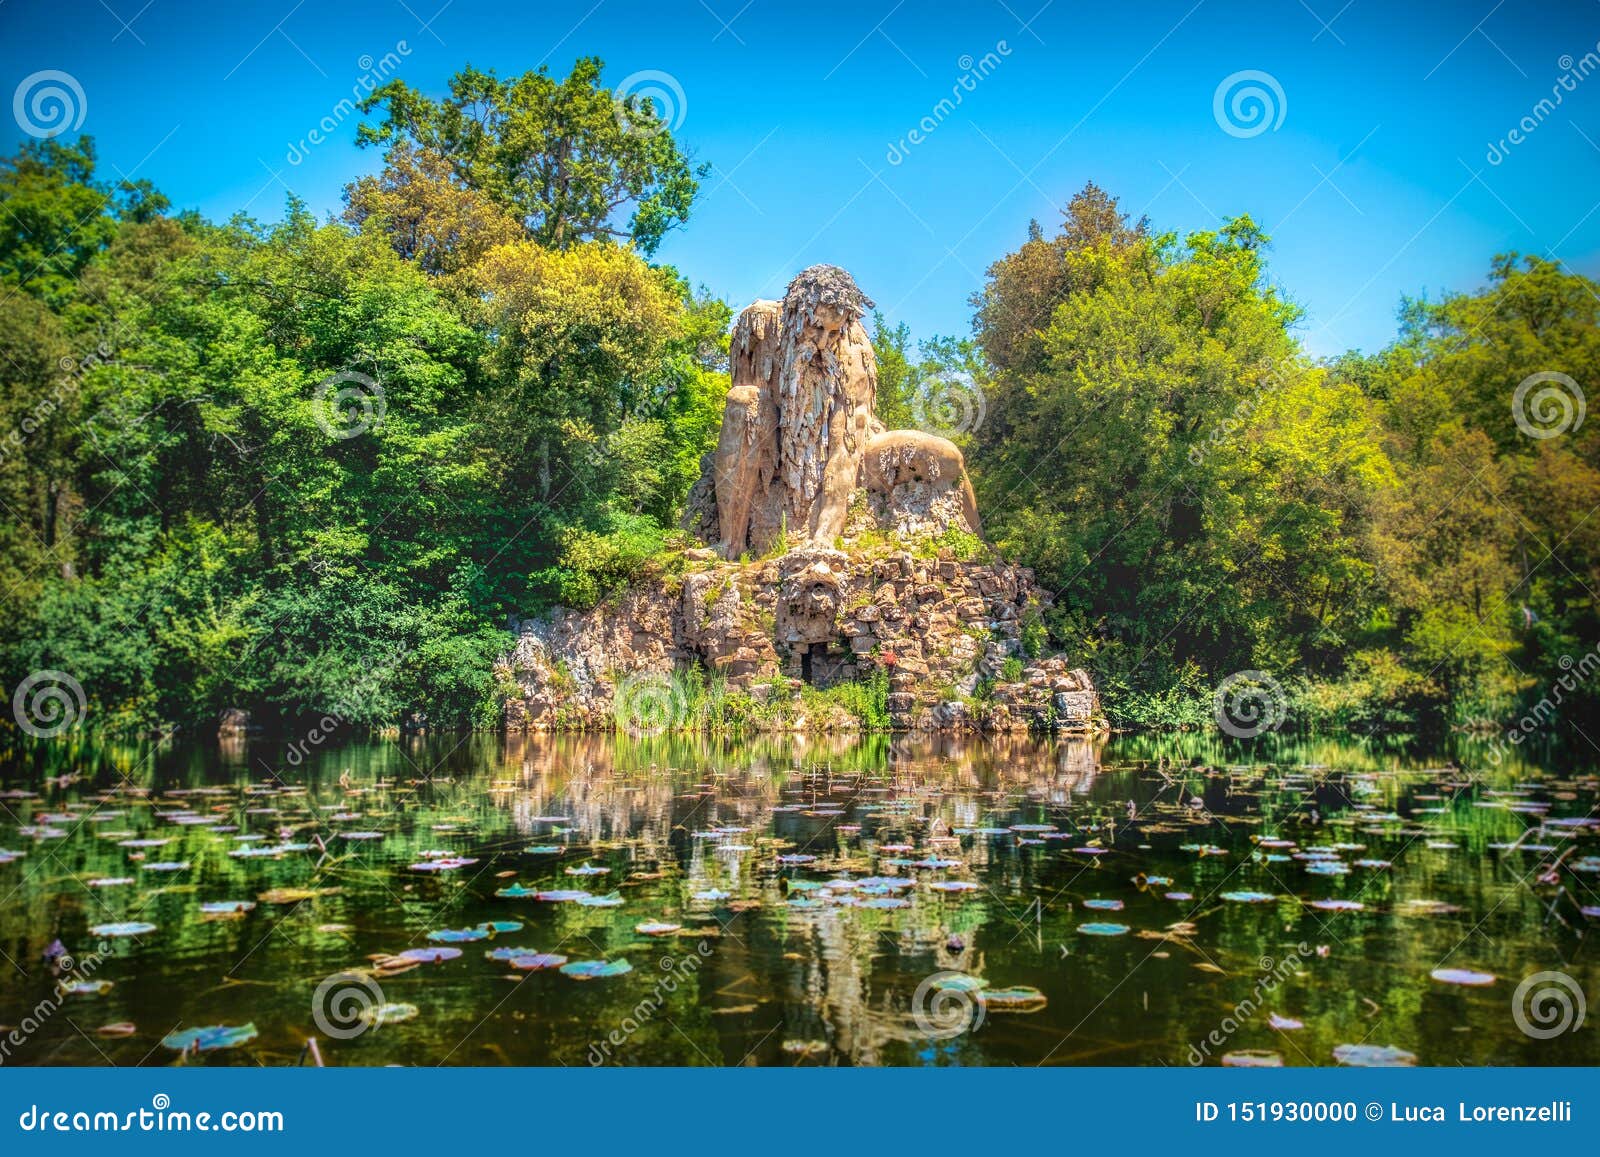 villa demidoff pratolino park and the colosso del appennino colossus statue with pond full of waterlilies and leaves